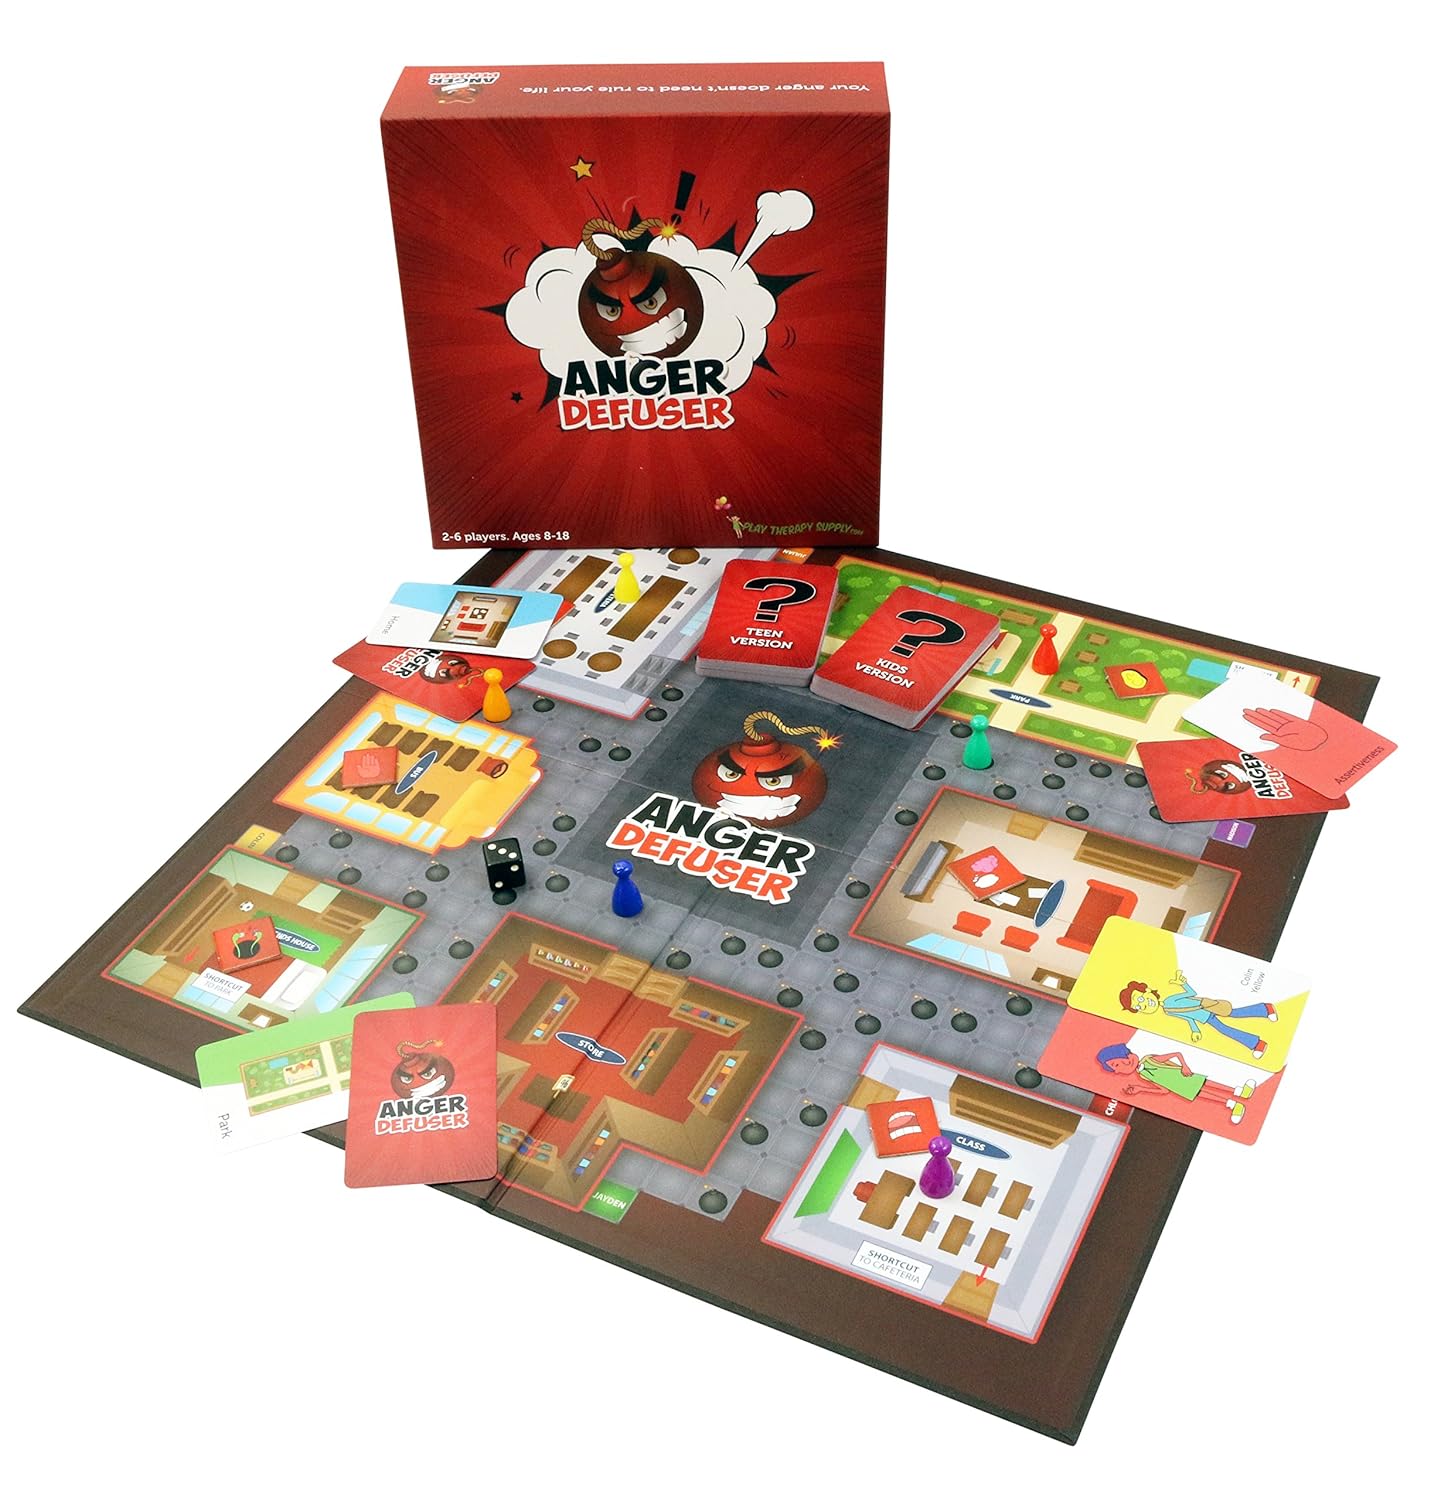 Anger Defuser: The Fun Anger Management Game for Kids and Teens